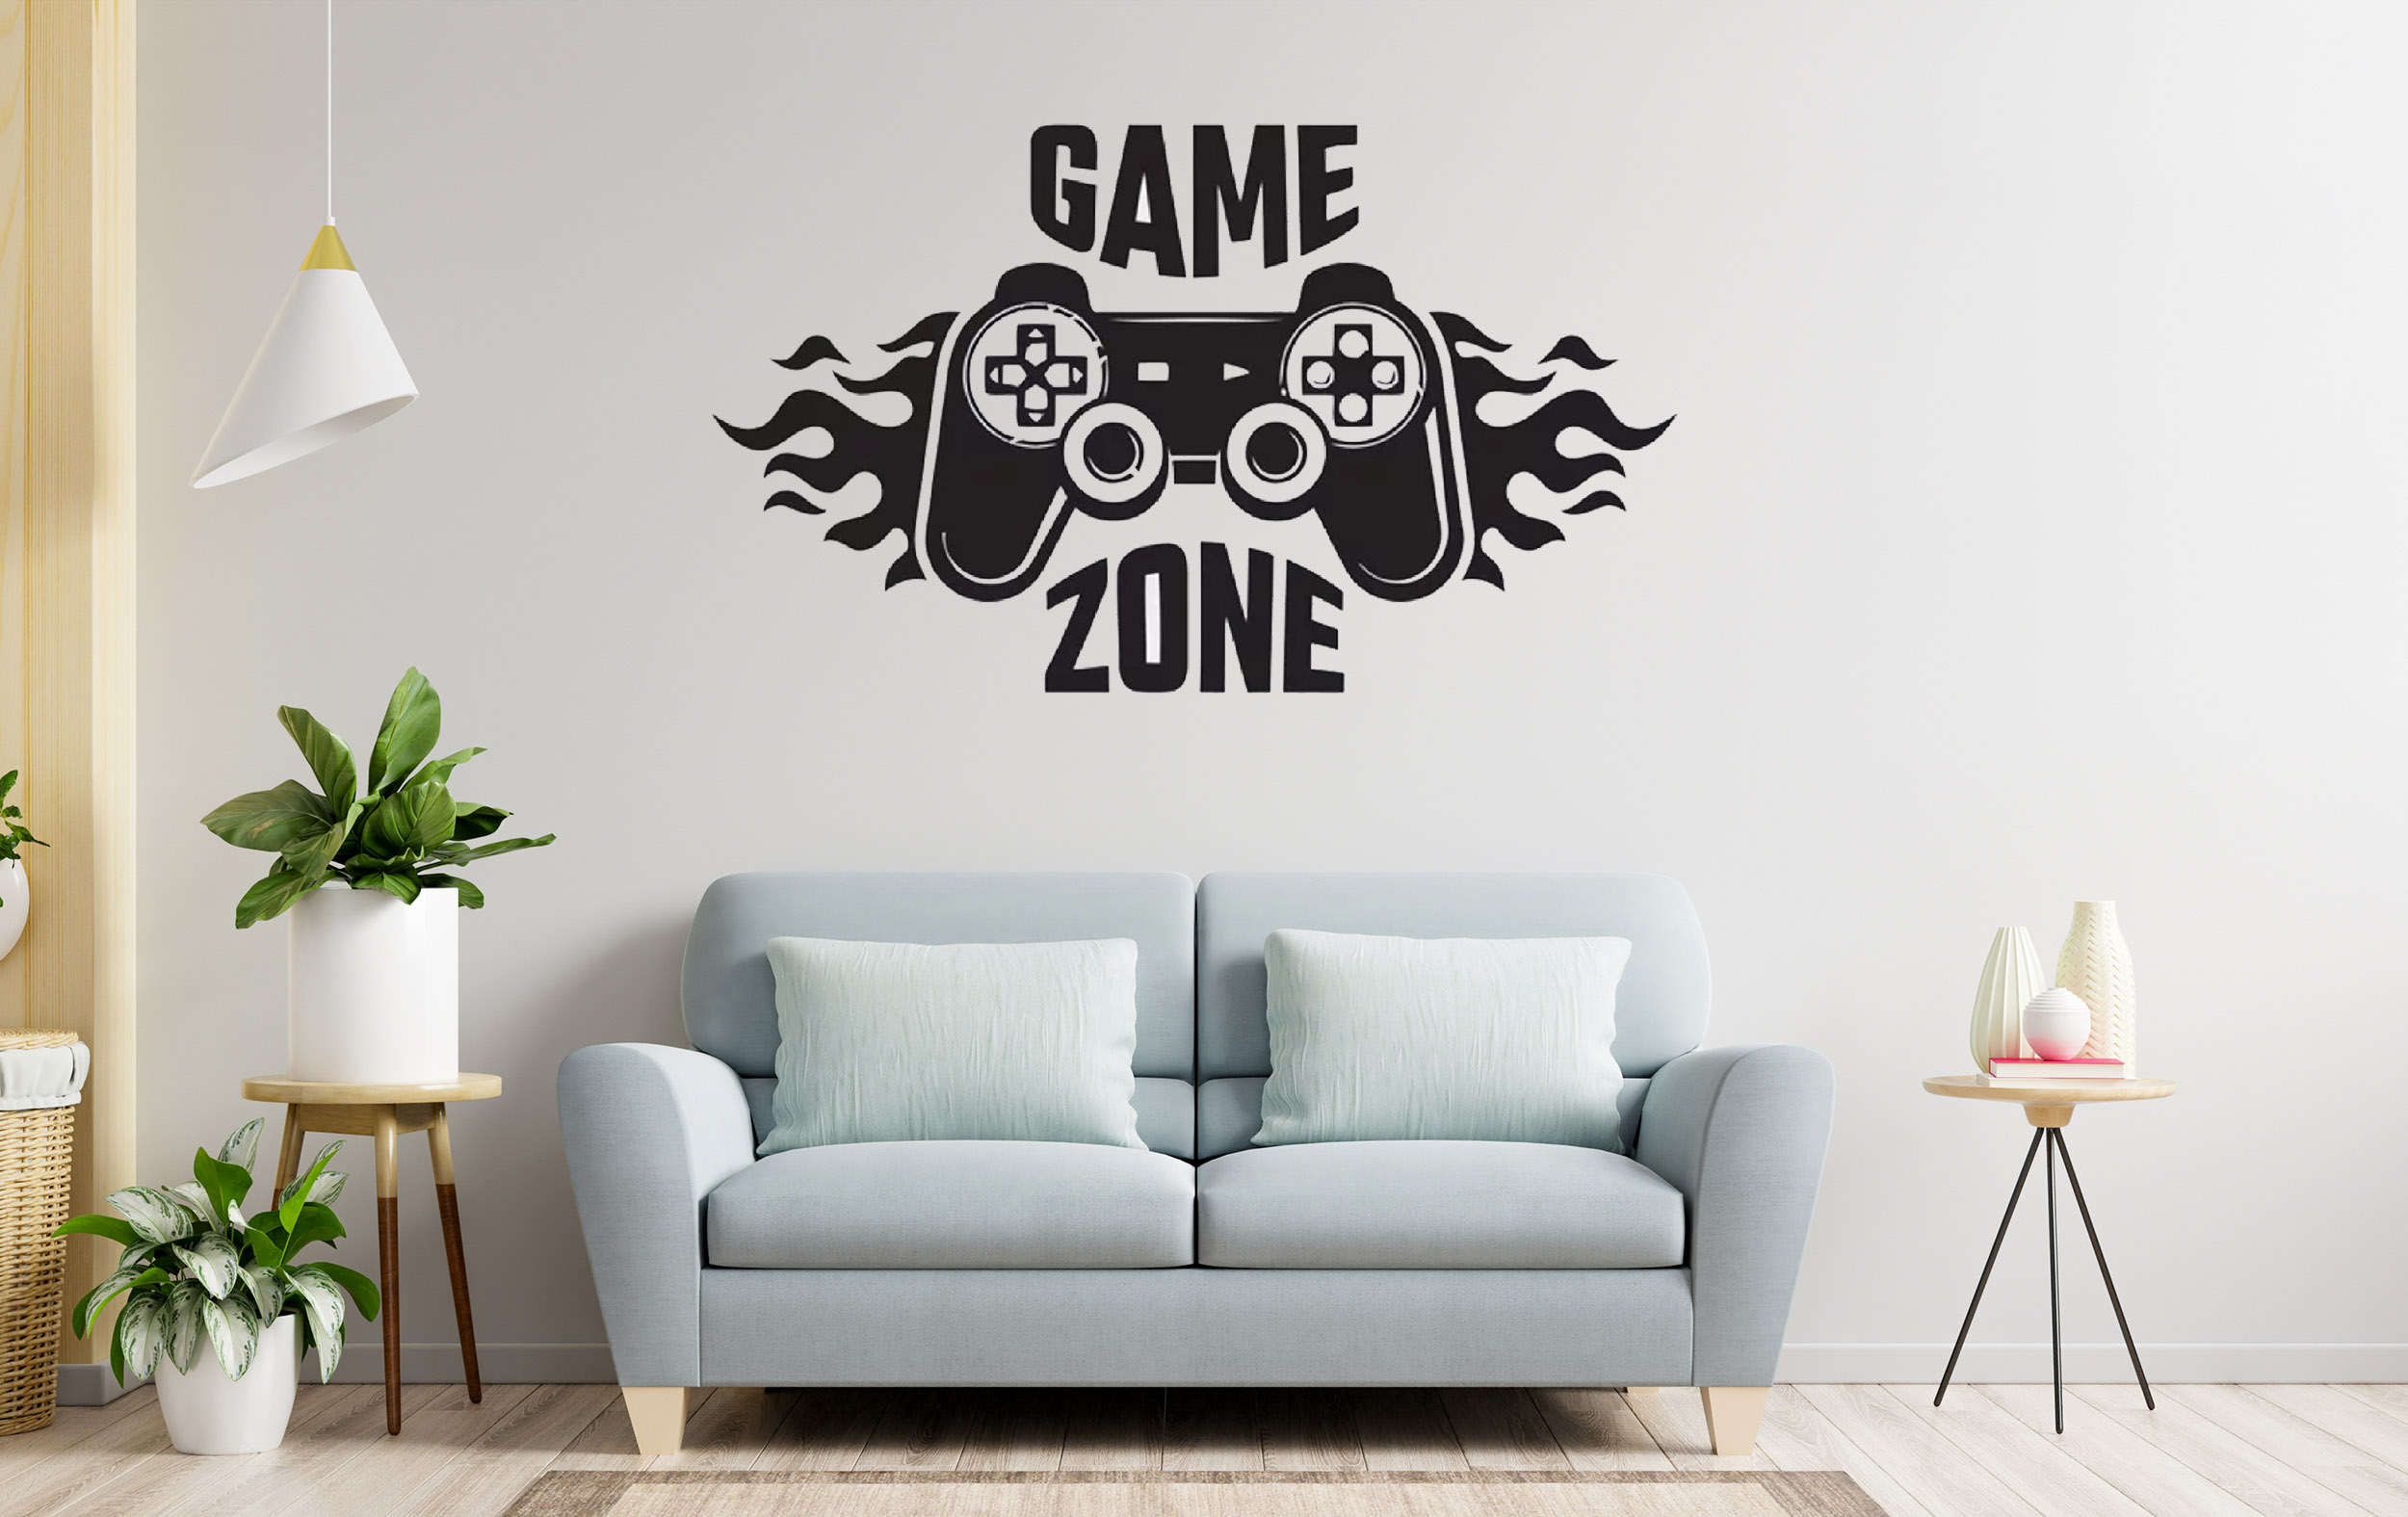 30+ Wall Stickers Ideas For Teen Boys Using WallDesign’s Vinyl Sticker and Printed Decal